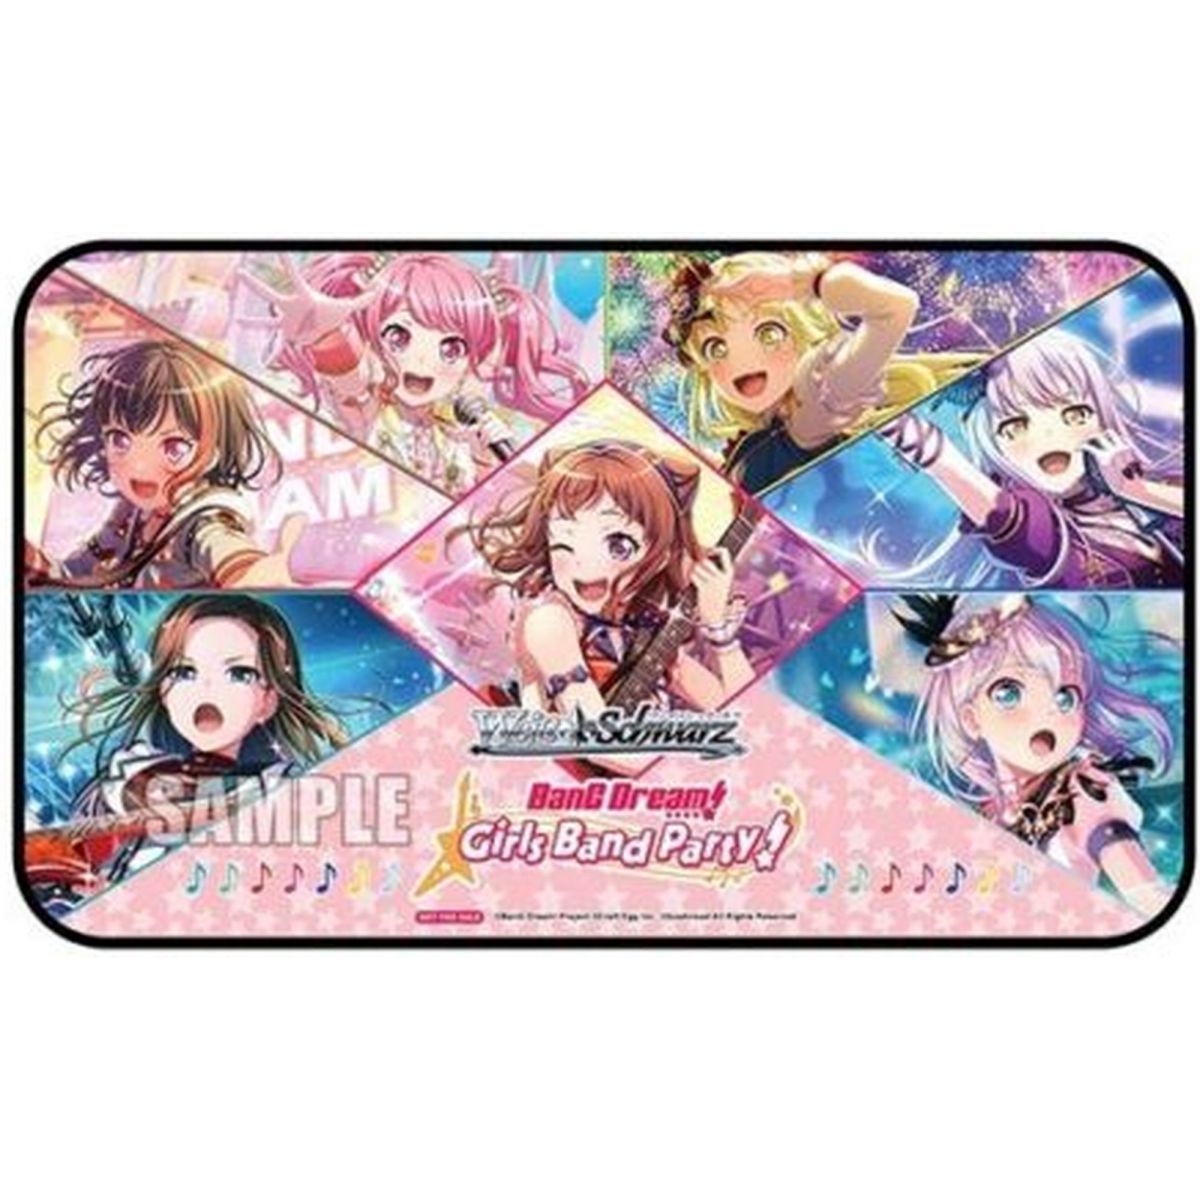 Weiss Schwarz - Playmat - BanG Dream Girls Band Party - Sealed